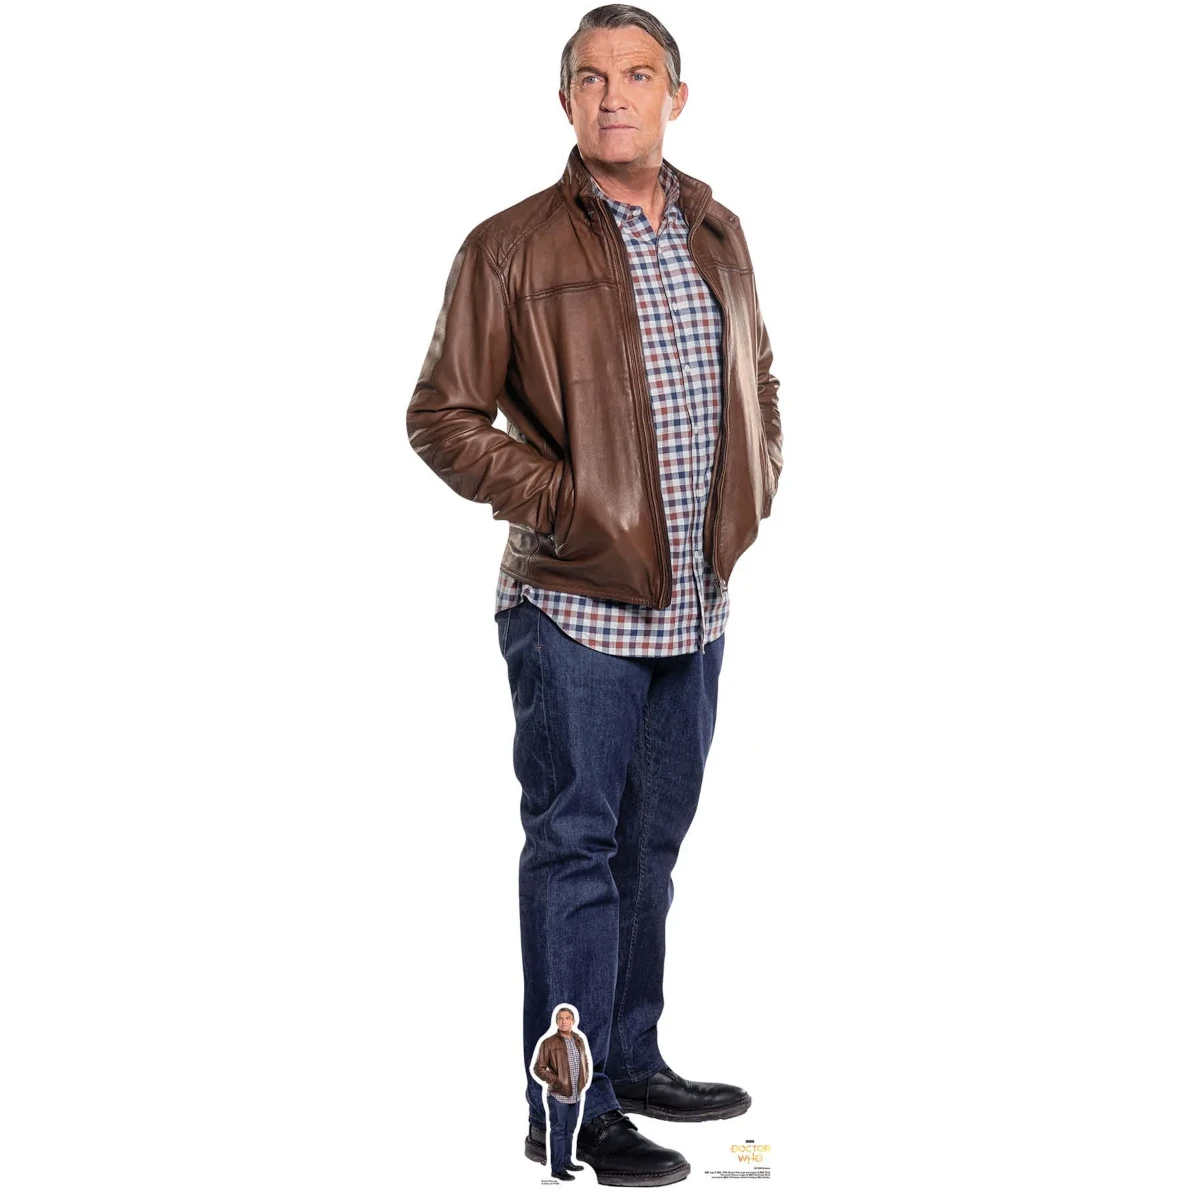 SC1200 Graham O'Brien 'Bradley Walsh' (Doctor Who) Official Lifesize + Mini Cardboard Cutout Standee Front